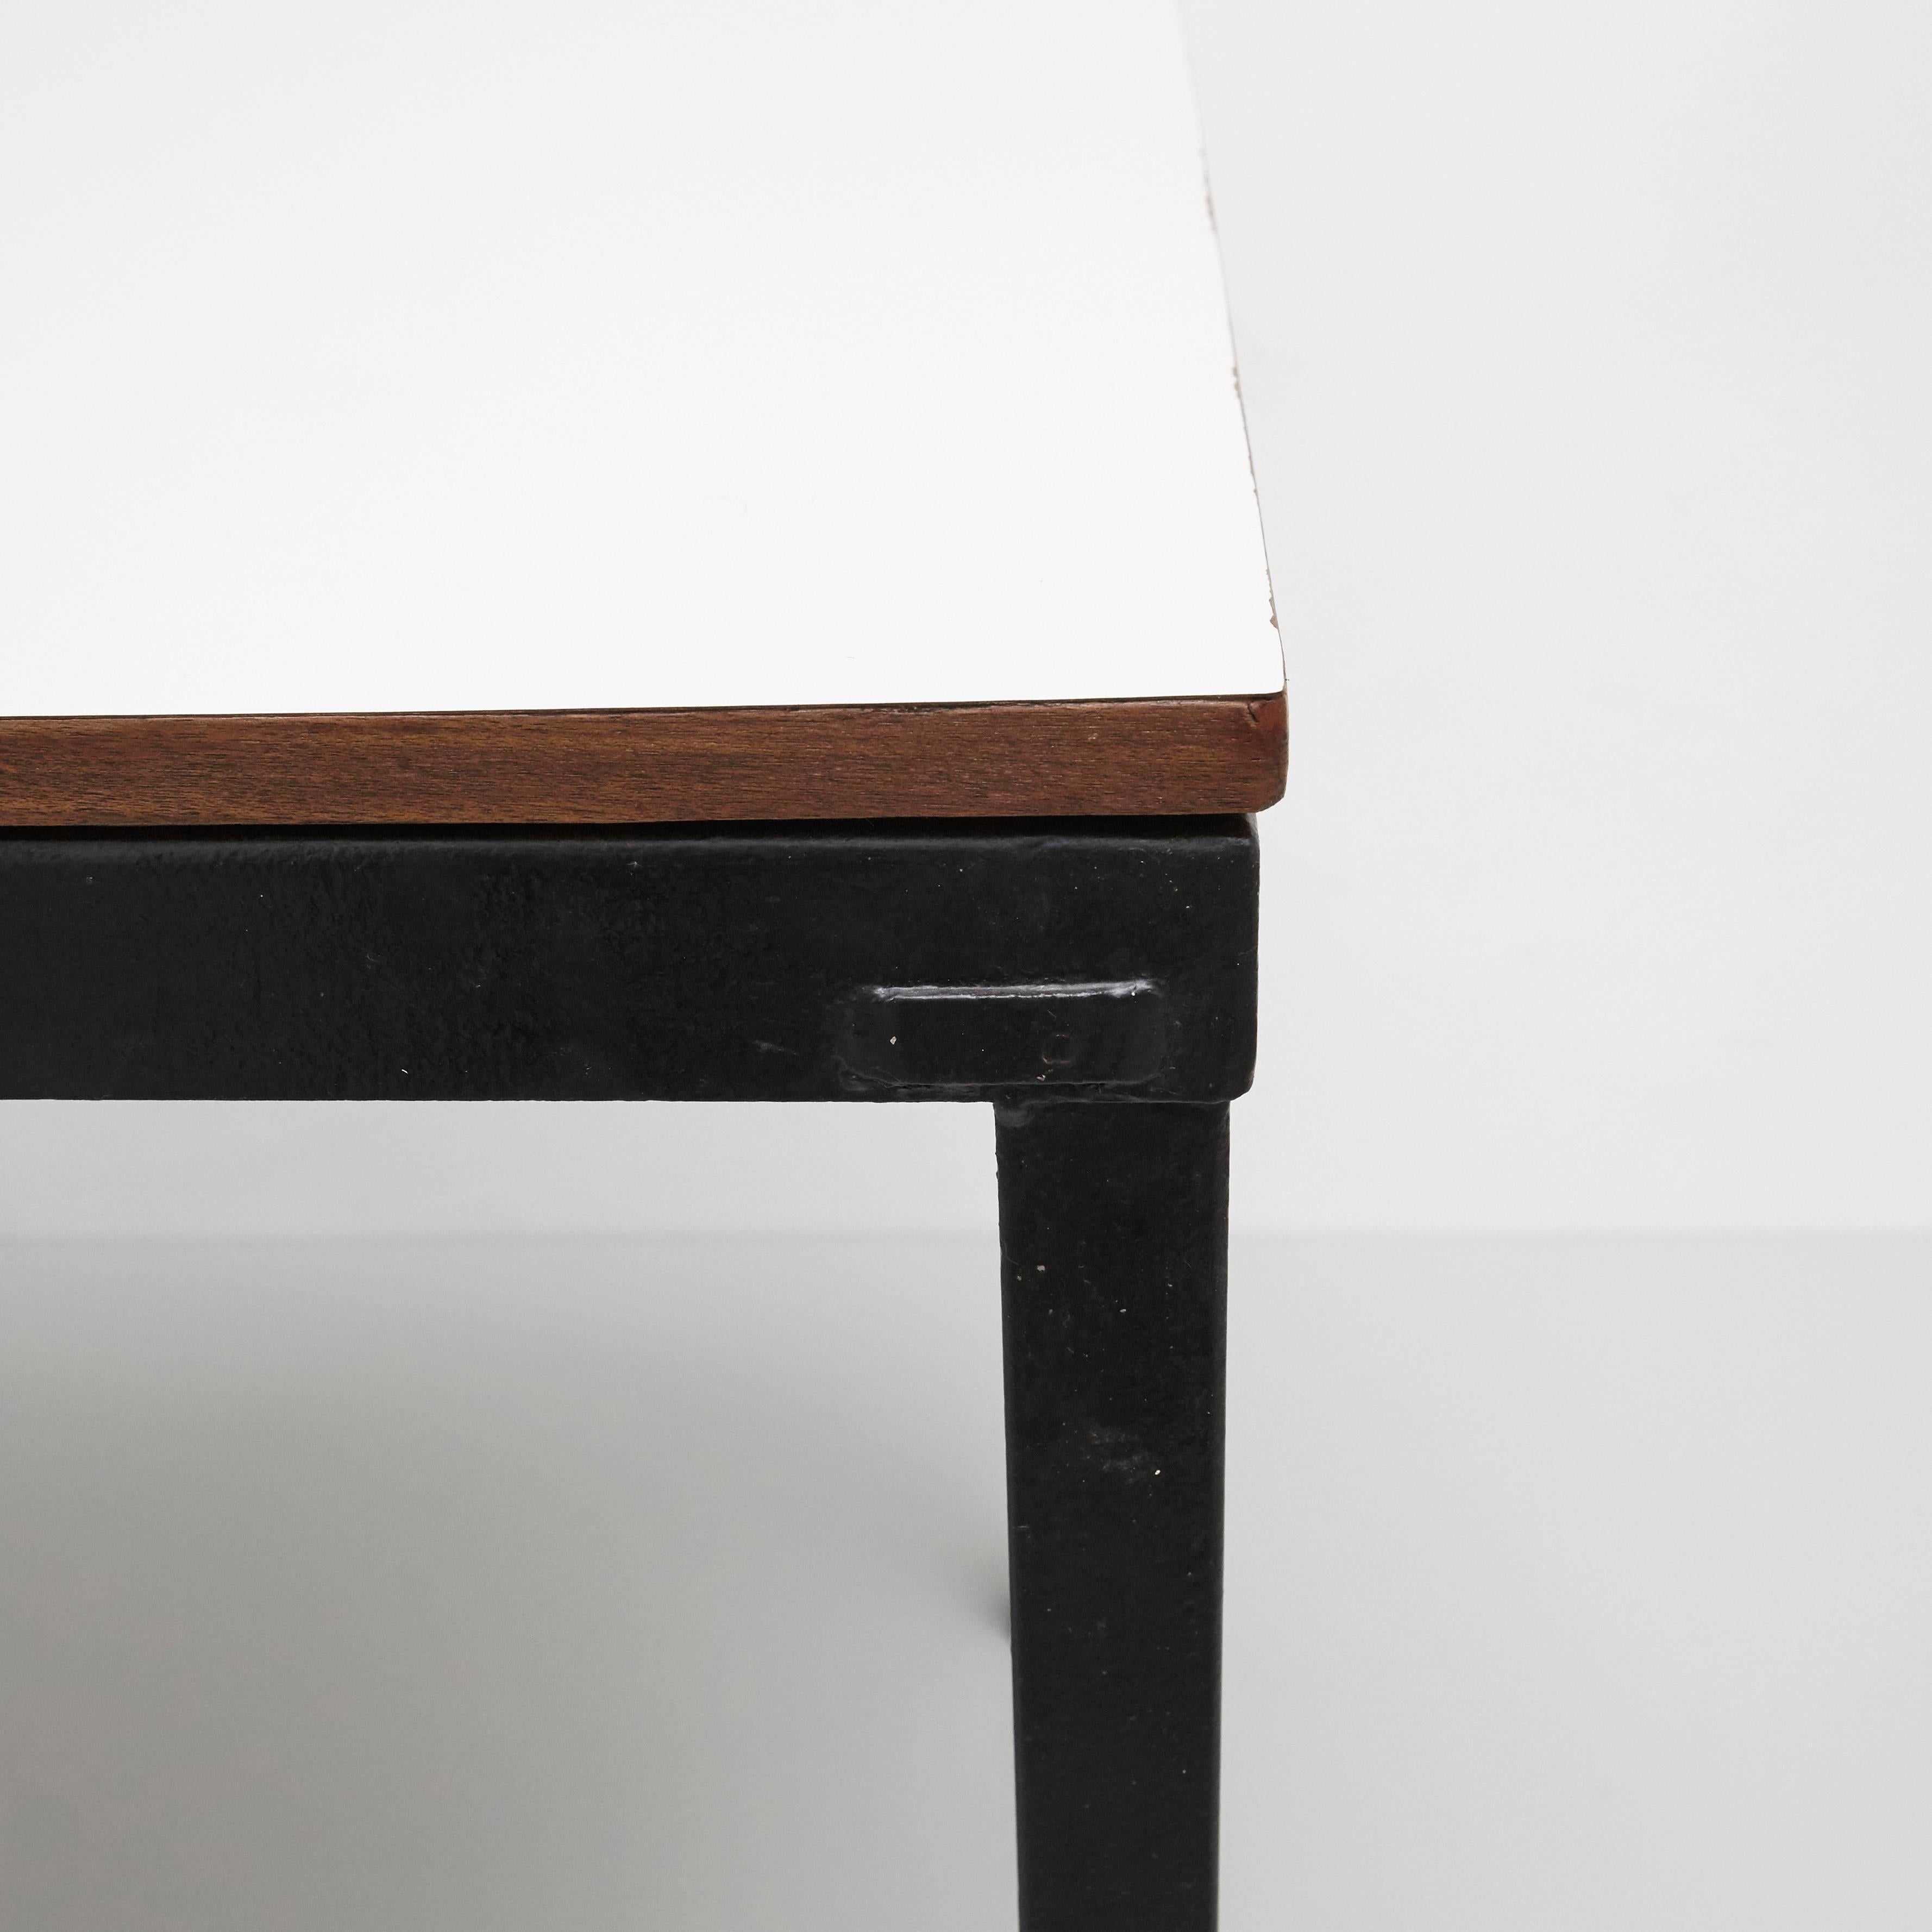 Steel Charlotte Perriand Metal, Wood and Formica Bridge Table for Cansado, circa 1950